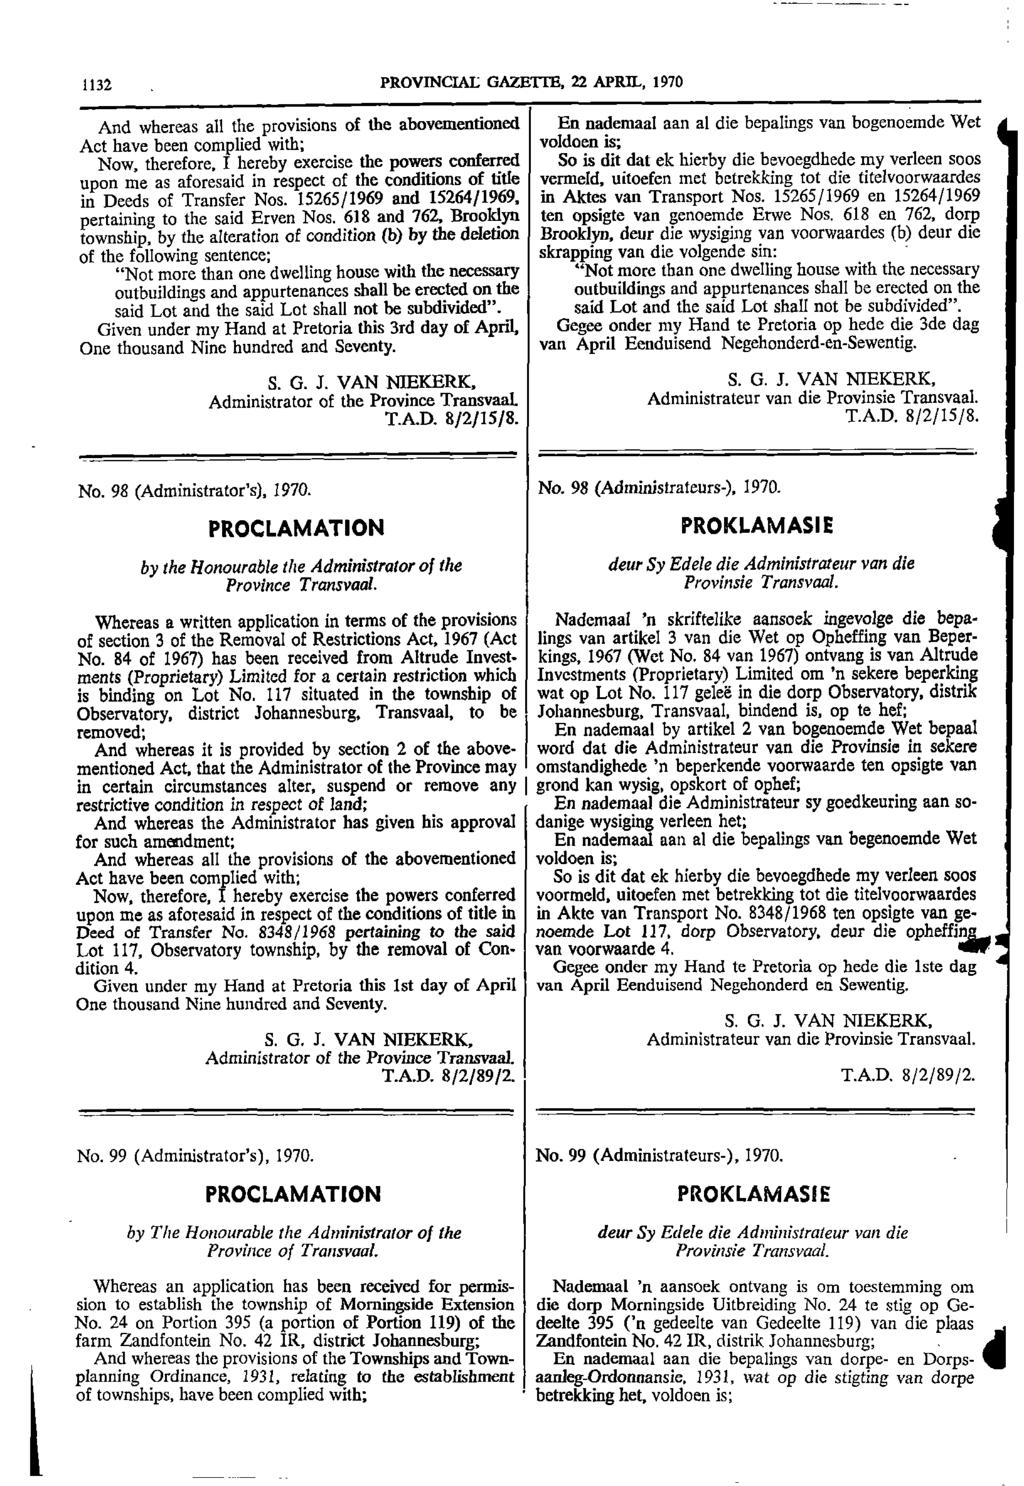 1132 PROVINCIAL GAZETTE 22 APRIL 1970 And whereas all the provisions of the abovementioned En nademaal aan al die bepalings van bogenoemde Wet Act have been complied with; voldoen is; Now therefore I